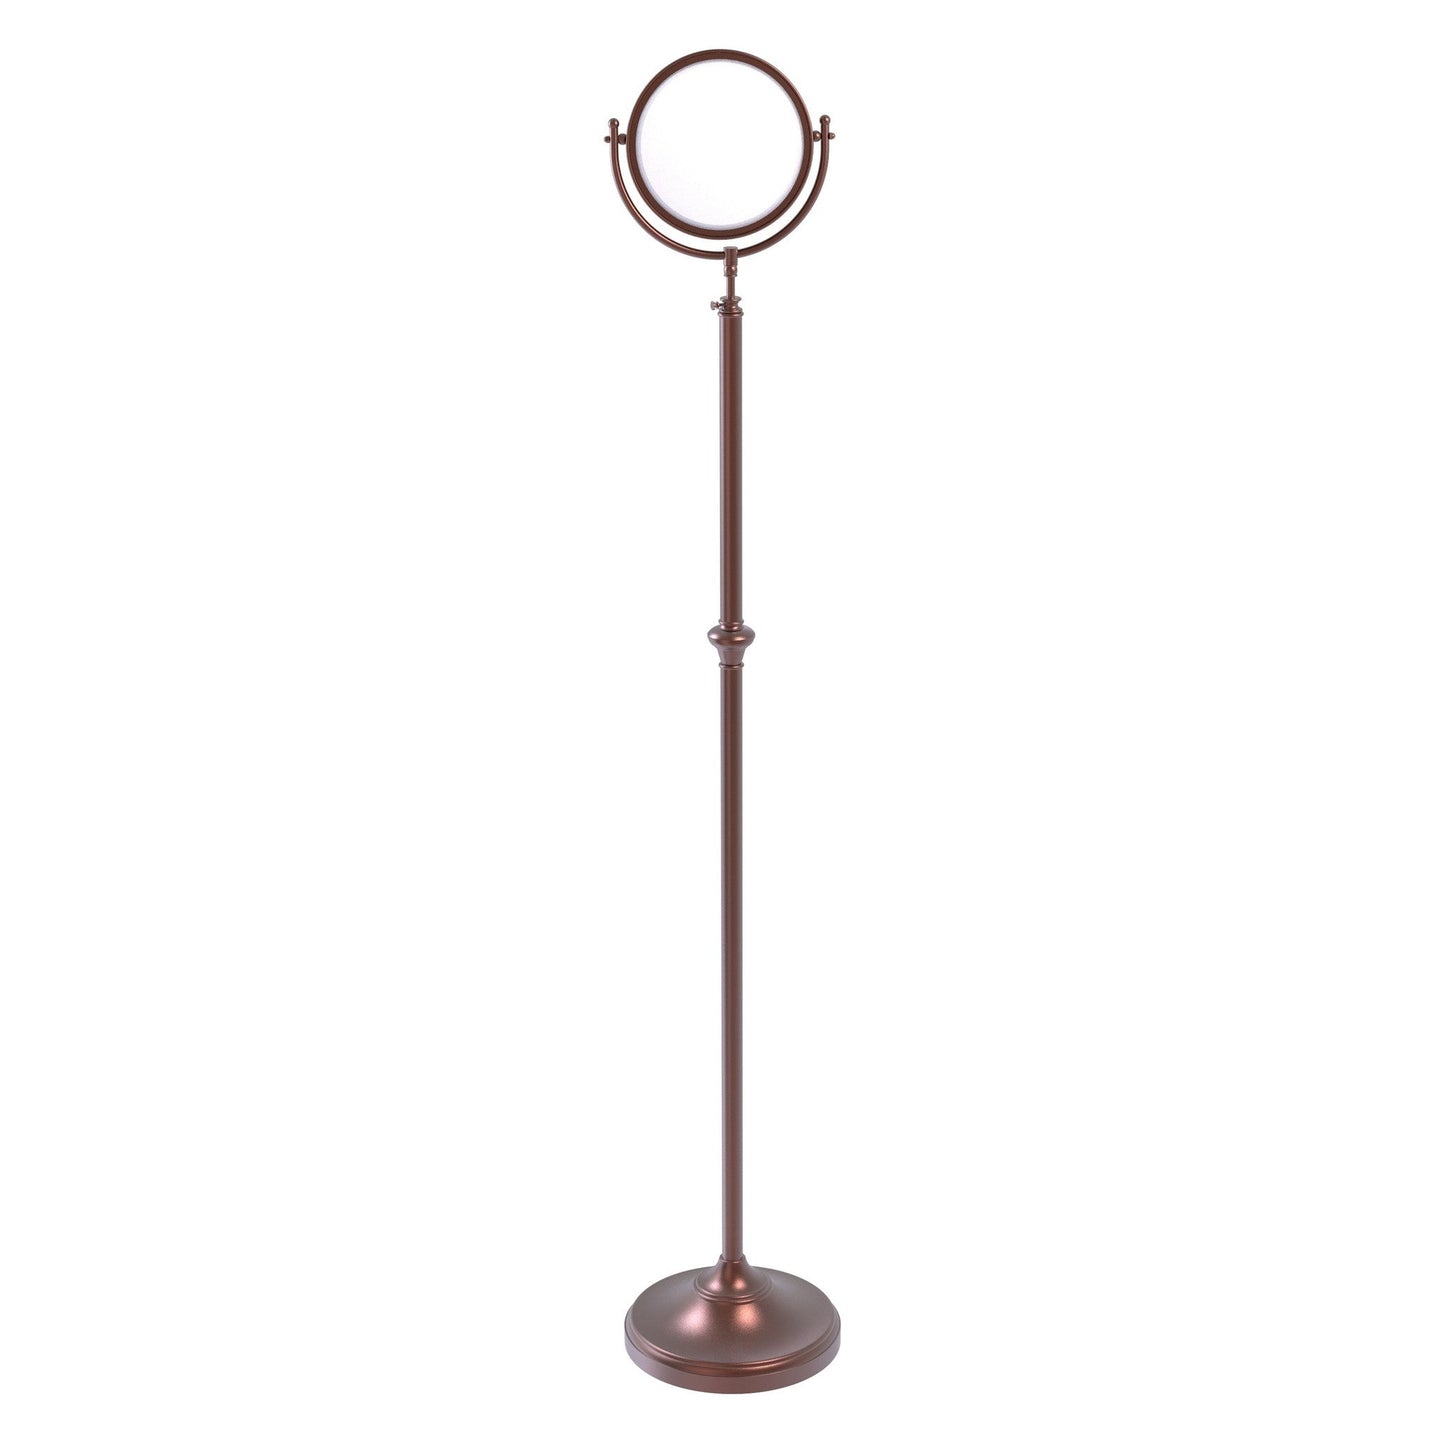 Allied Brass DMF-2/5X 10.5" x 10.5" Antique Copper Solid Brass Adjustable Height Floor Standing Make-Up Mirror With 5X Magnification